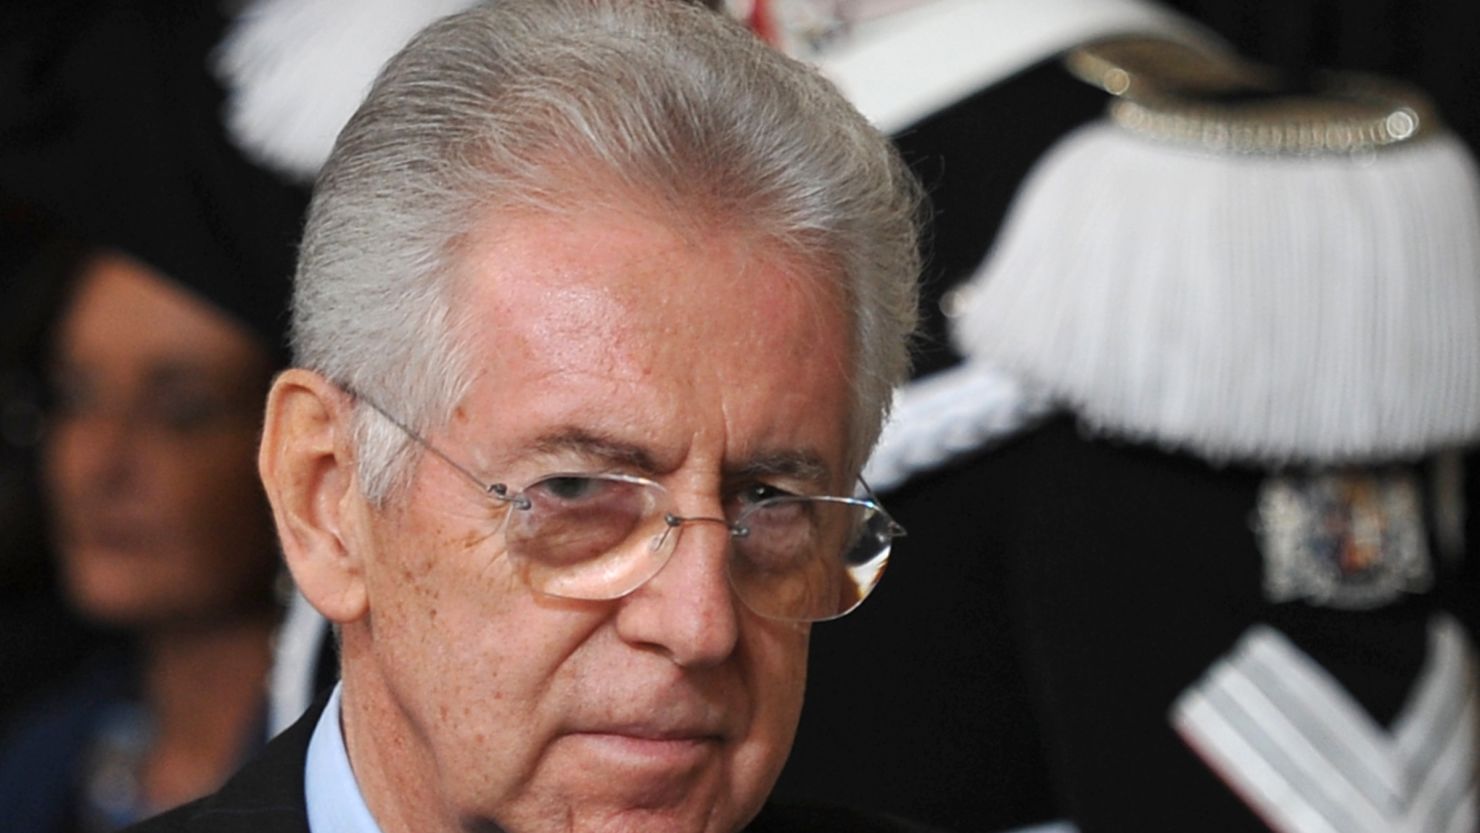 Mario Monti said Italy had to take "necessary sacrifices" or risk having an insolvent state and the destruction of the euro.